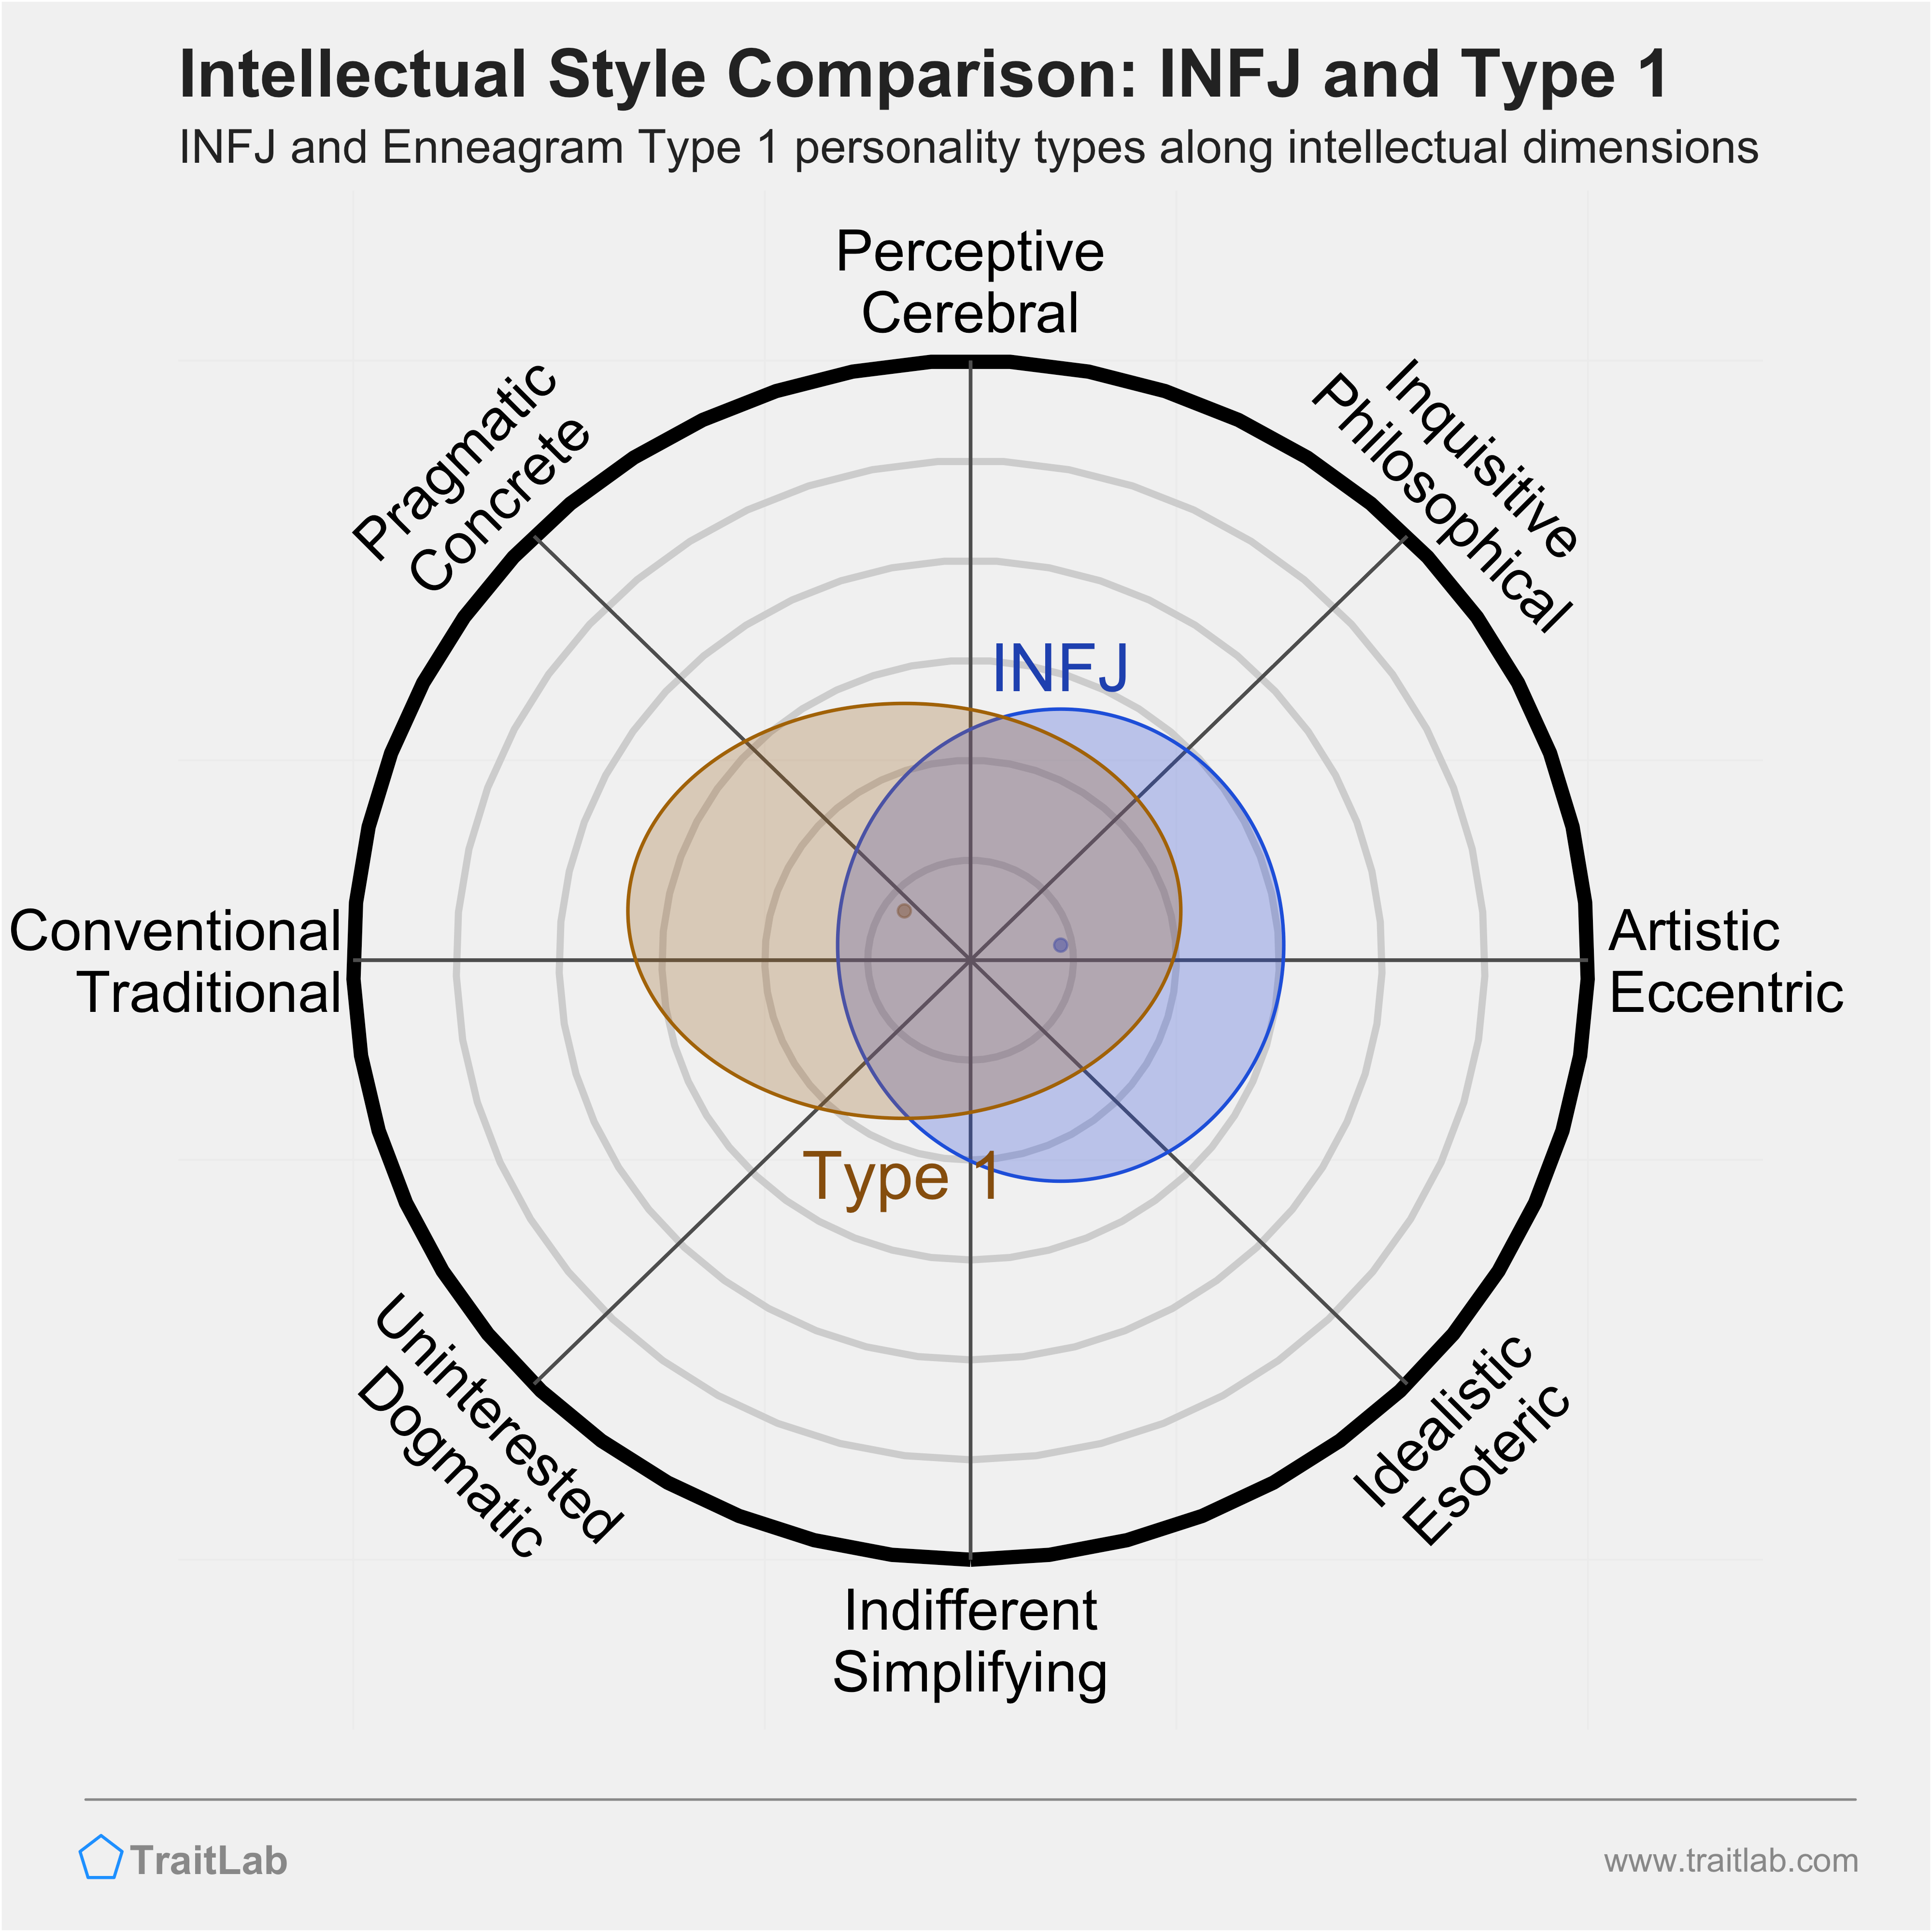 INFJ and Type 1 comparison across intellectual dimensions